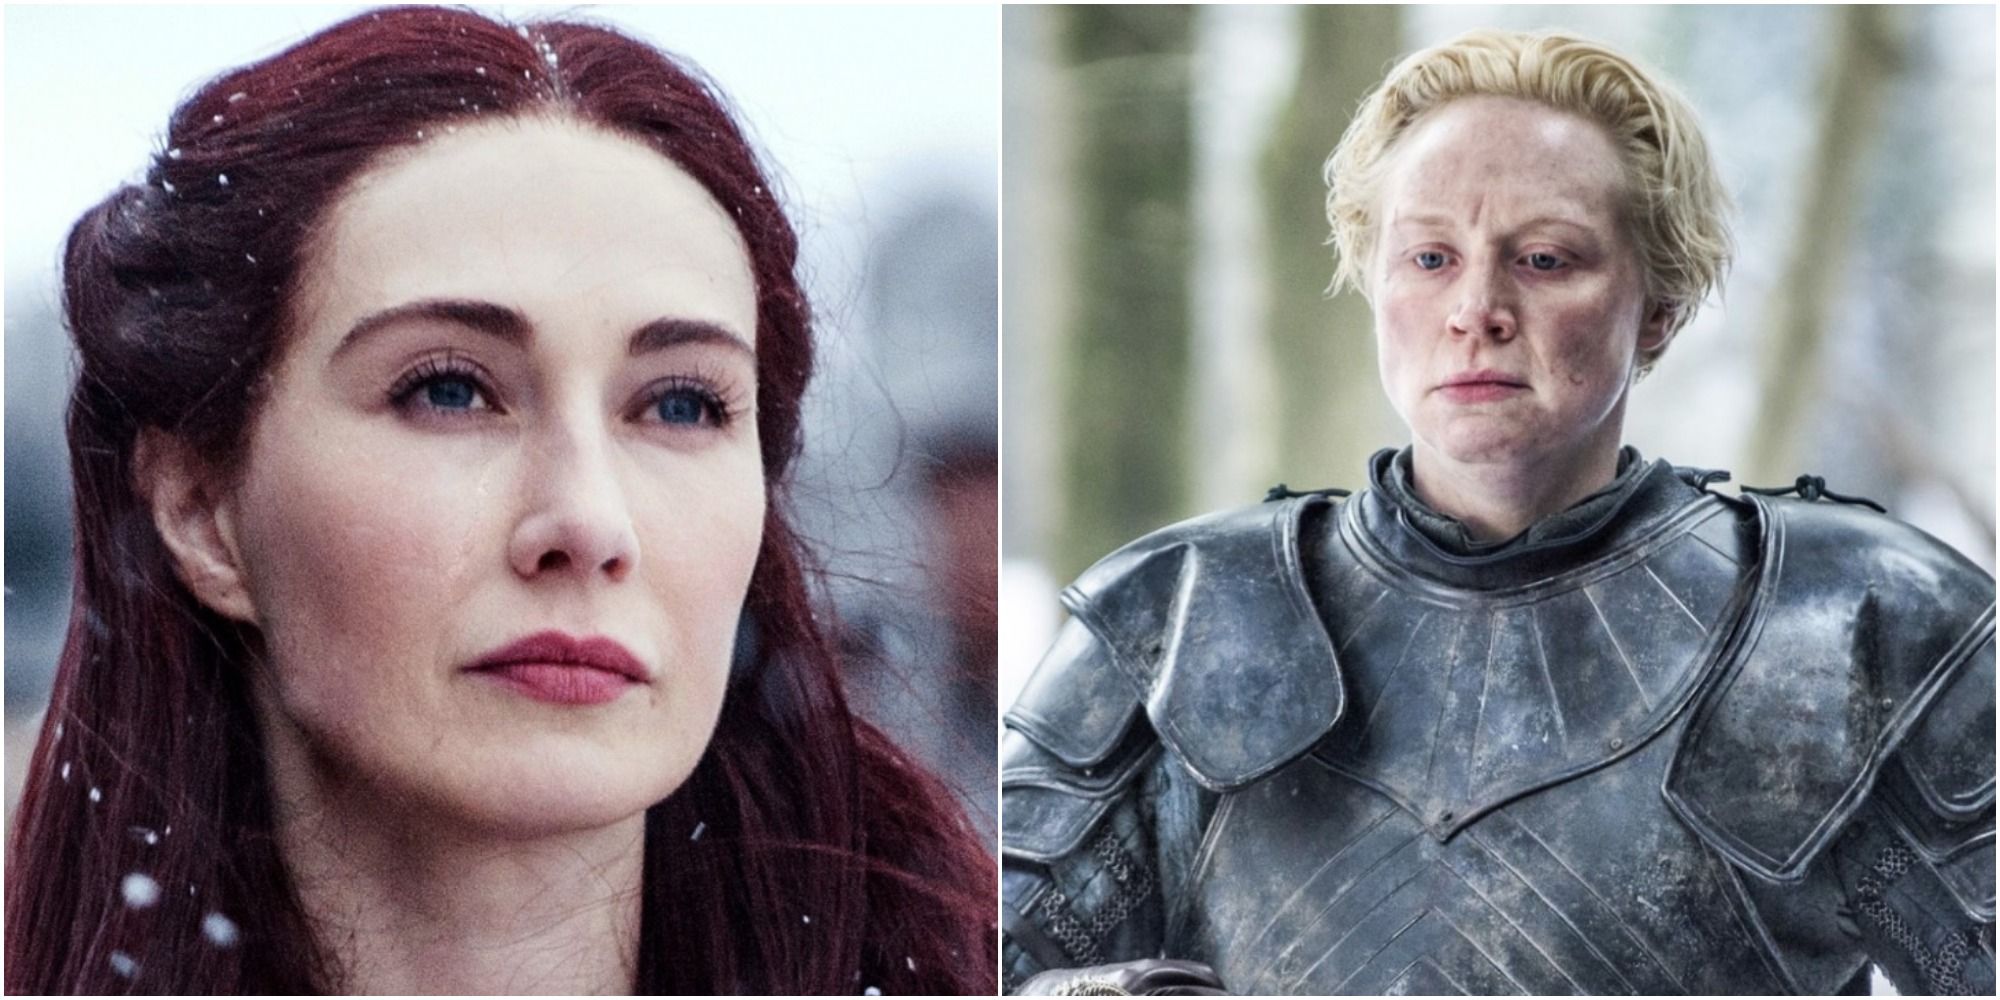 Melisandre and Brienne in Game of Thrones